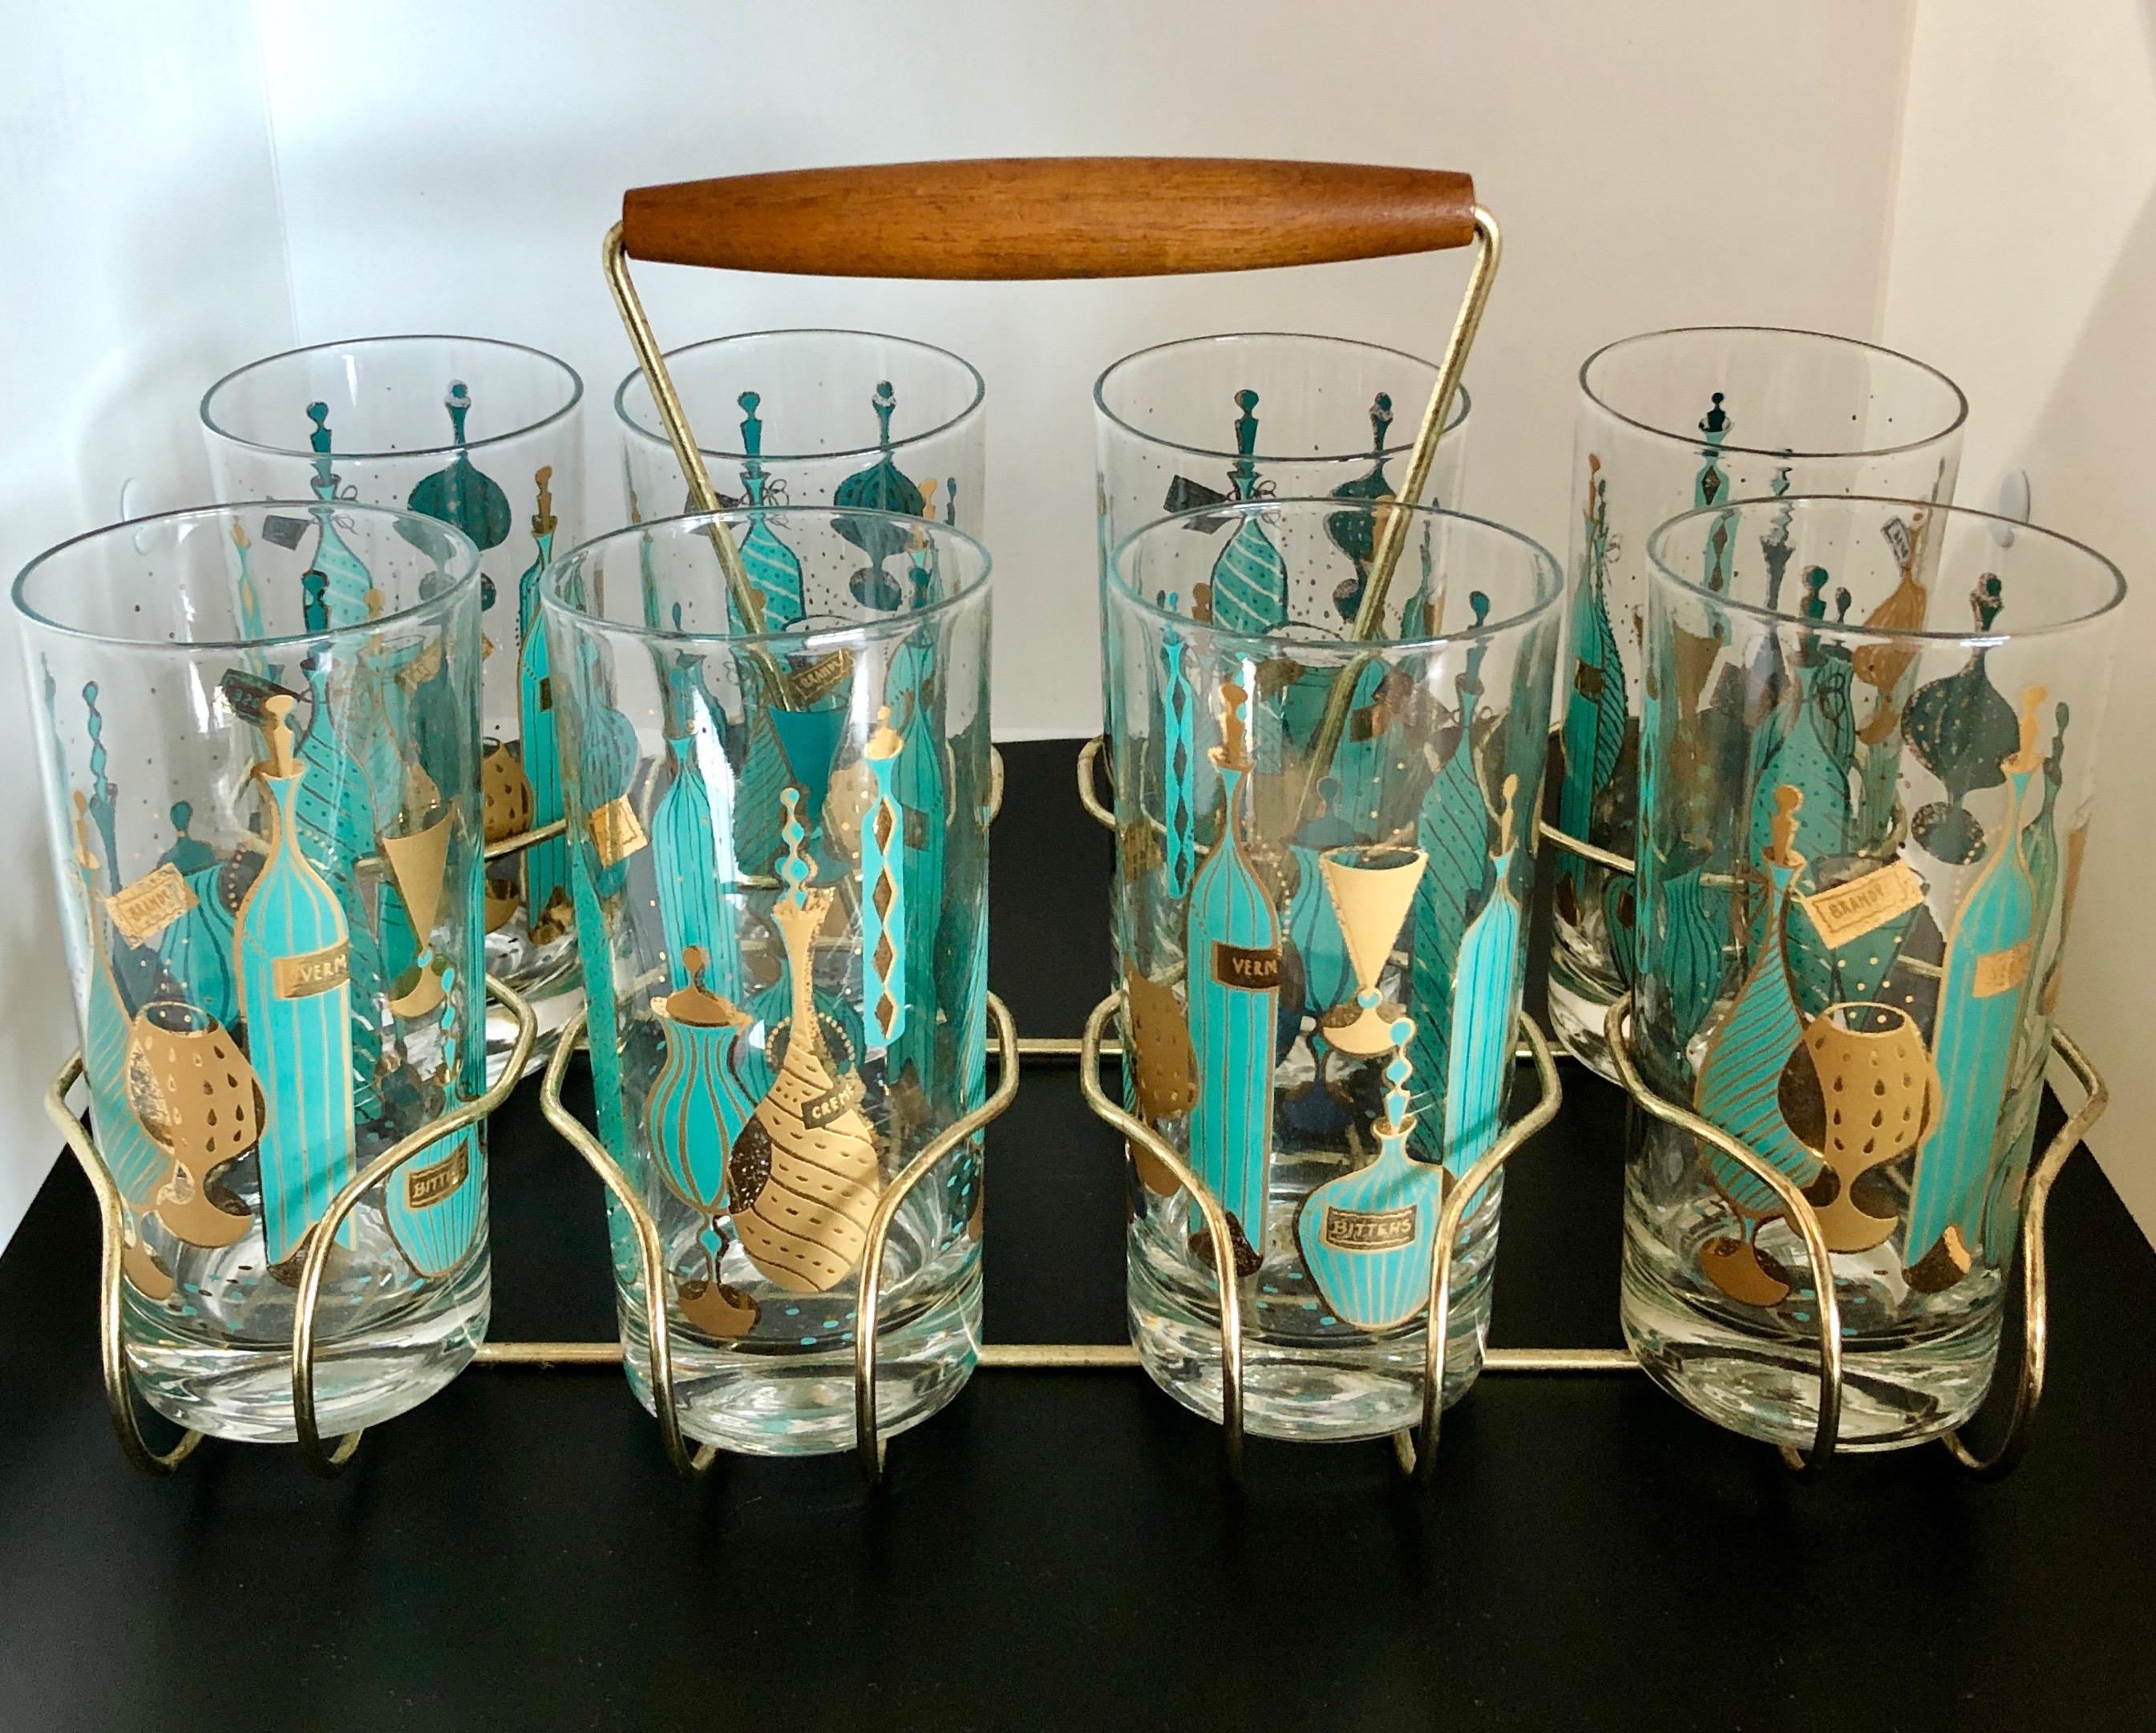 Offered is a nine-piece set of eight magnificent turquoise / aqua and gold Tom Collins cocktail glasses featuring exotic barware theme including bottles, decanters and cocktail glasses straight out of 